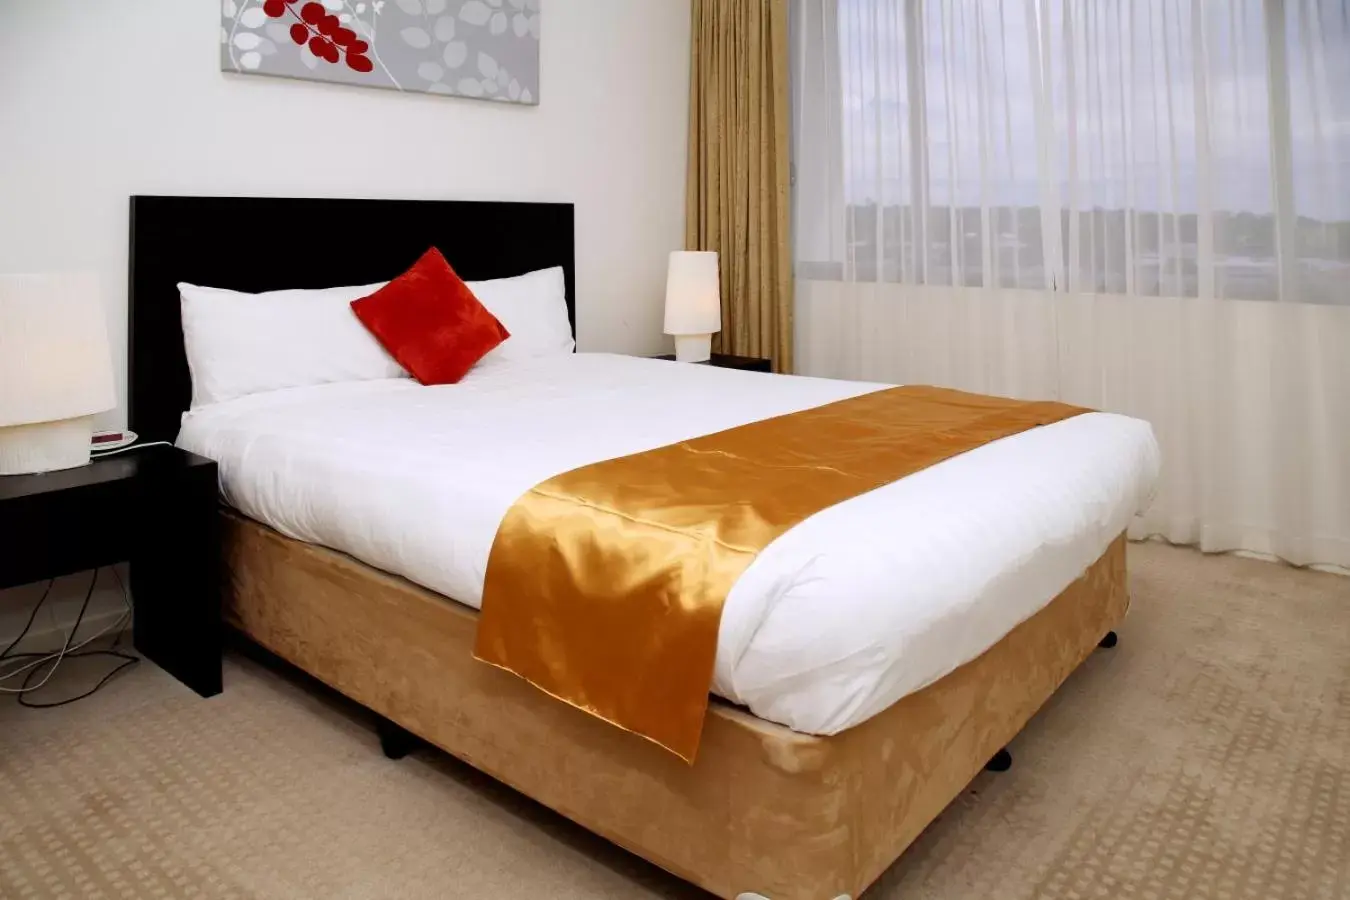 Bed in Toowoomba Central Plaza Apartment Hotel